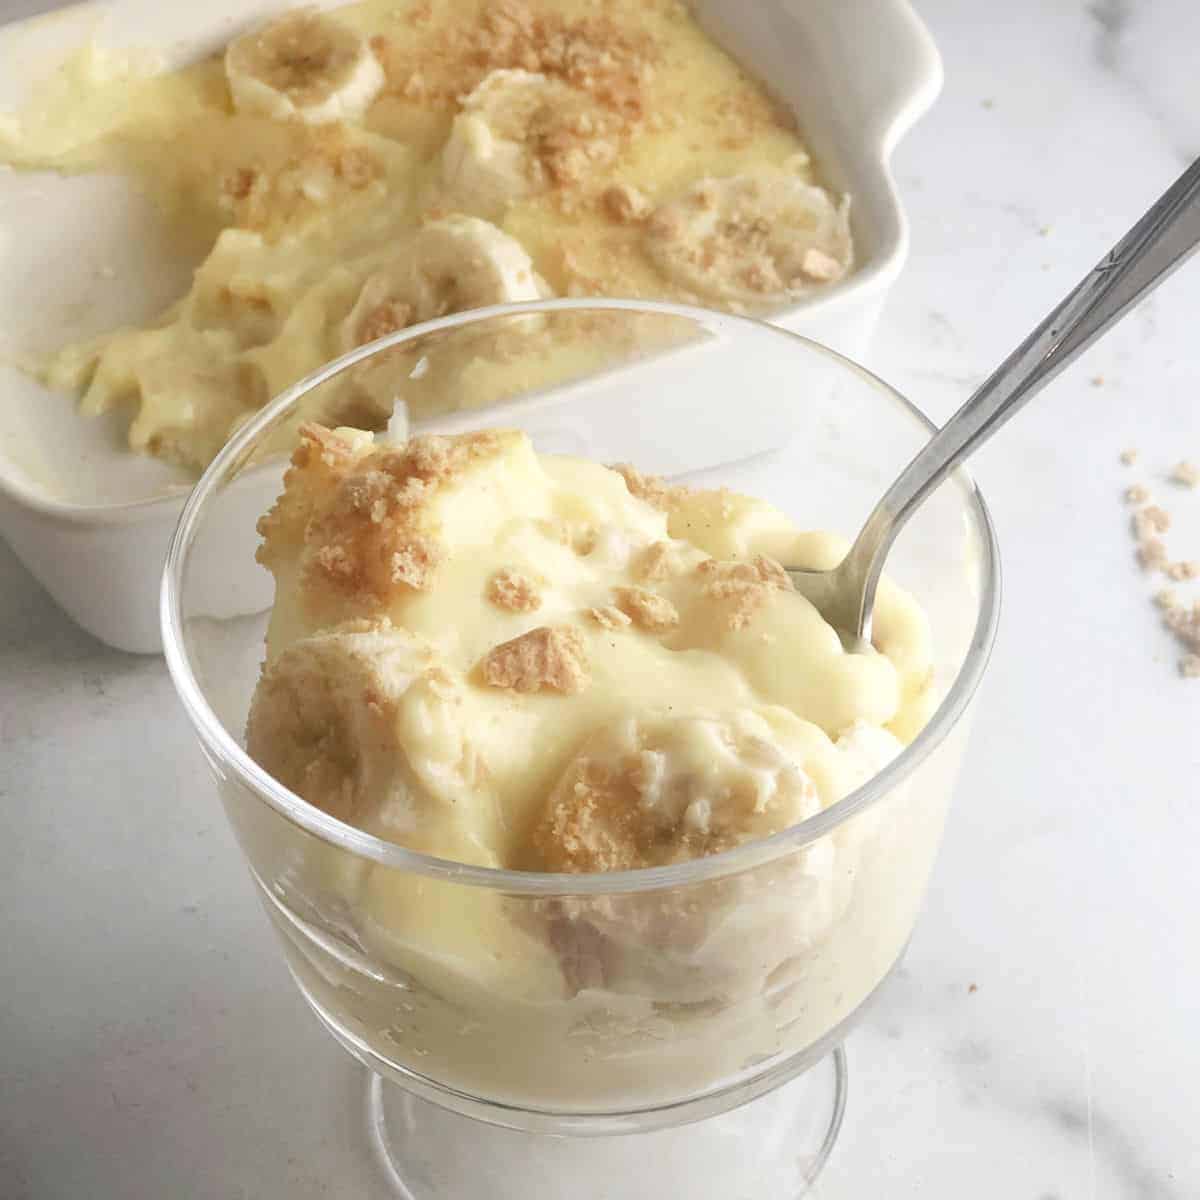 Serving of old fashioned banana pudding from scratch.